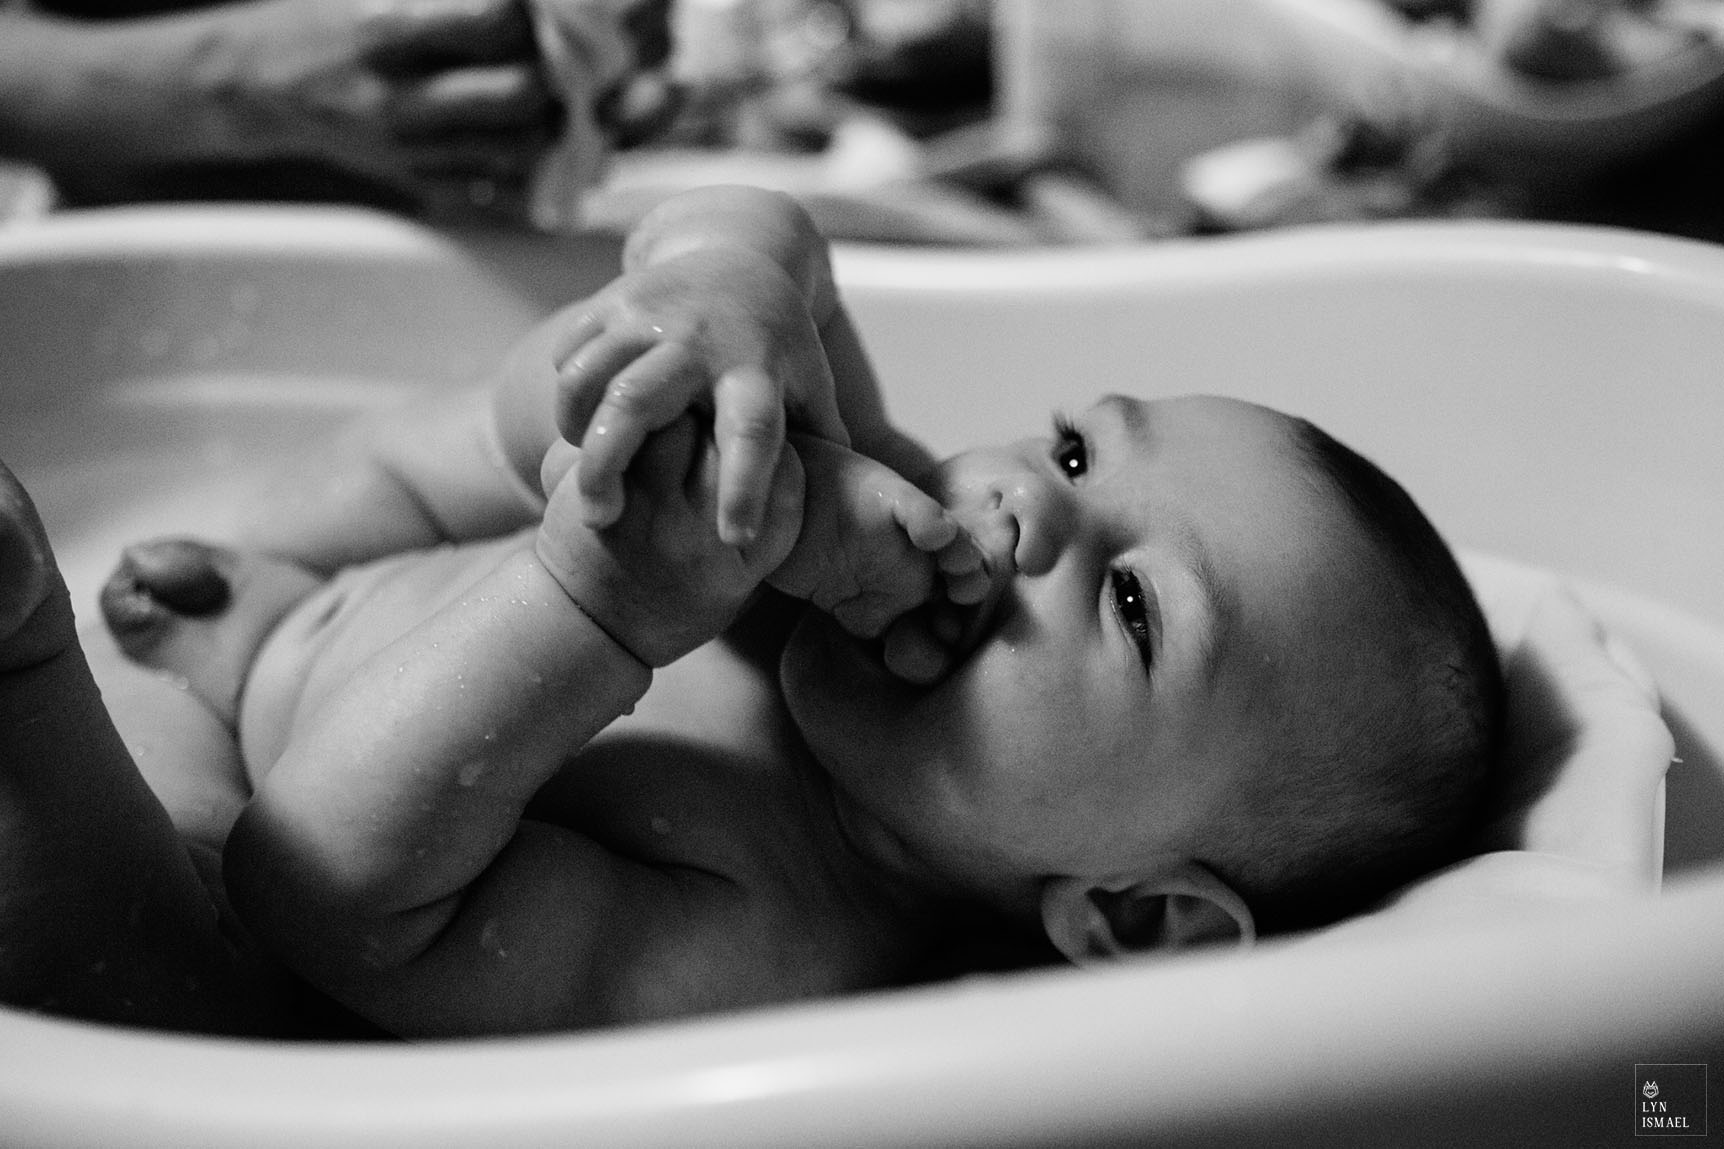 A baby boy sucks his little toes during bath time as photographed by Kitchener family documentary photographer